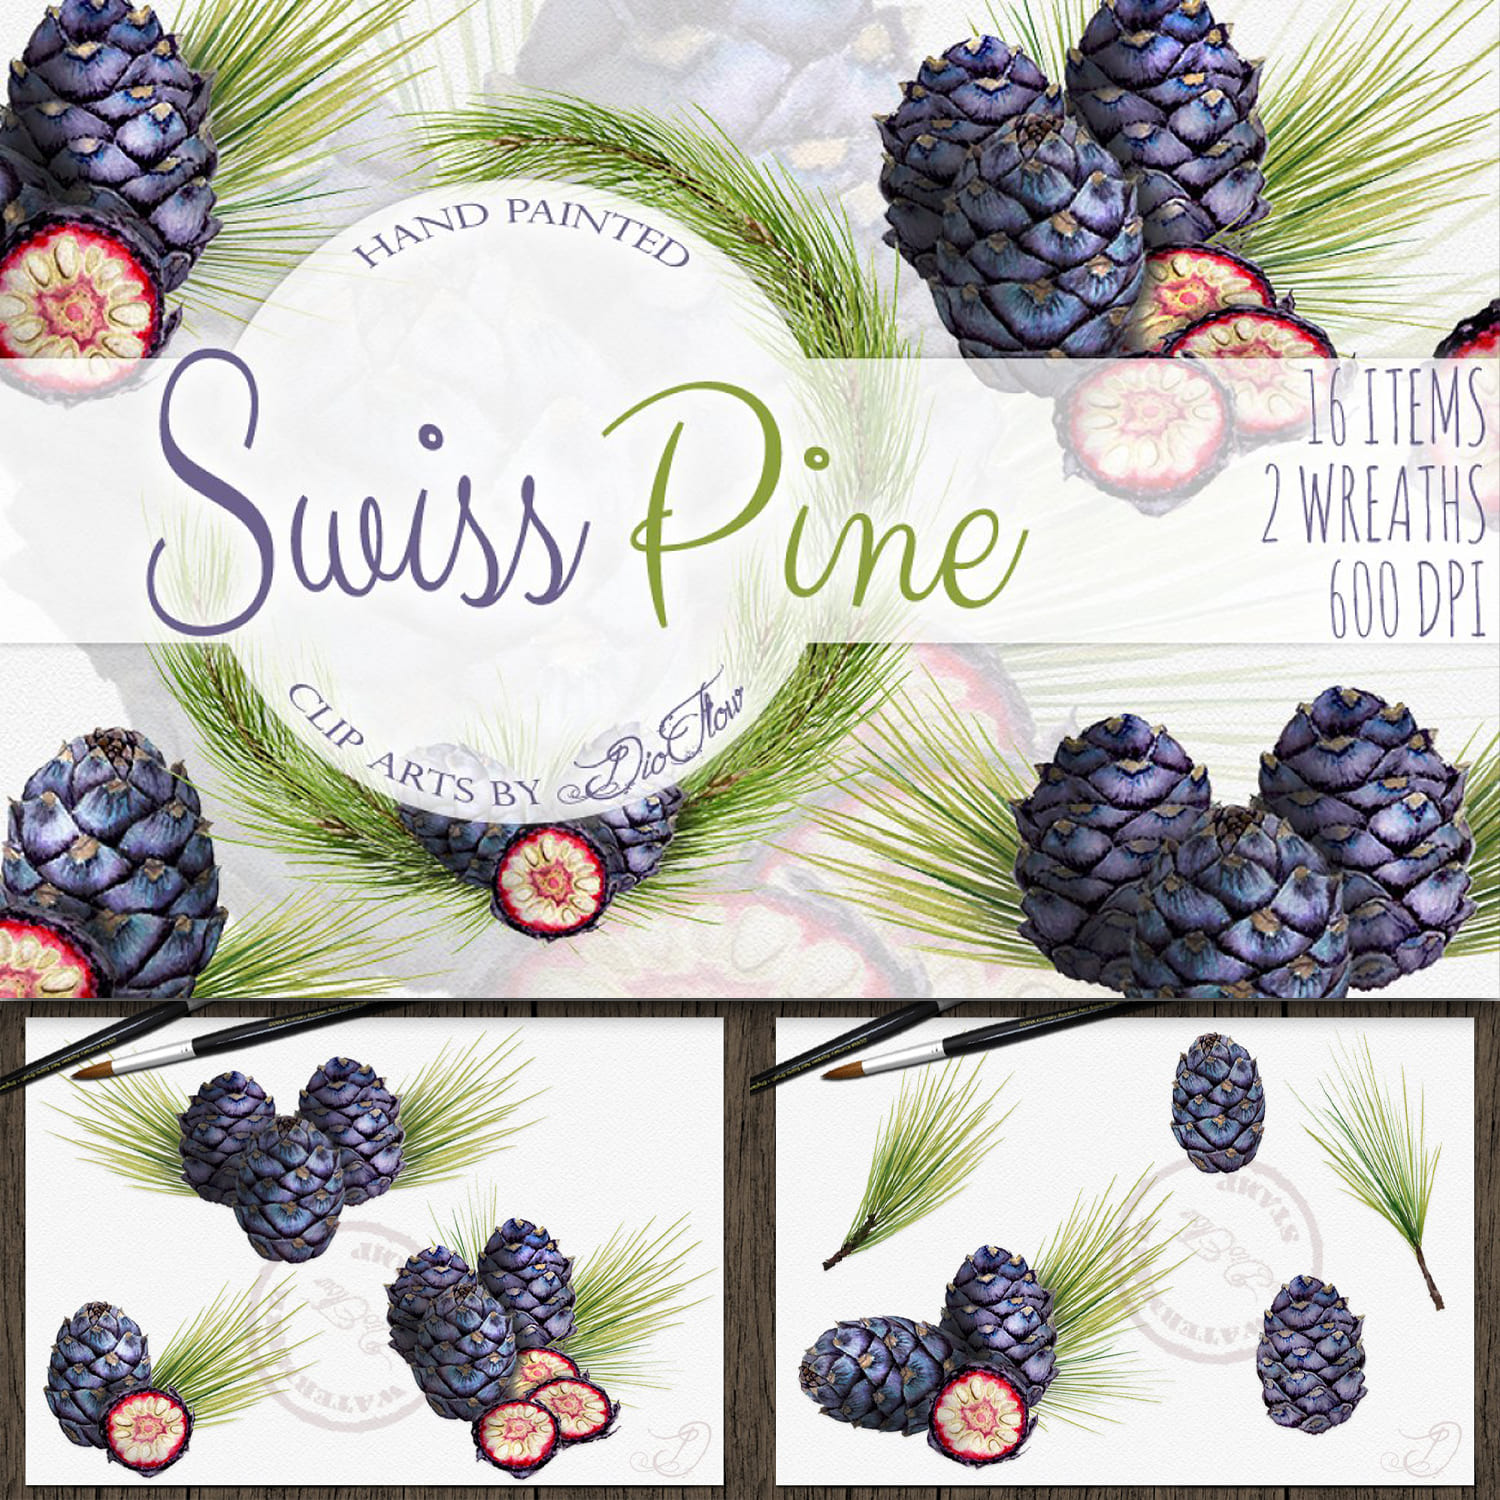 Swiss Pine Watercolor Illustration cover.